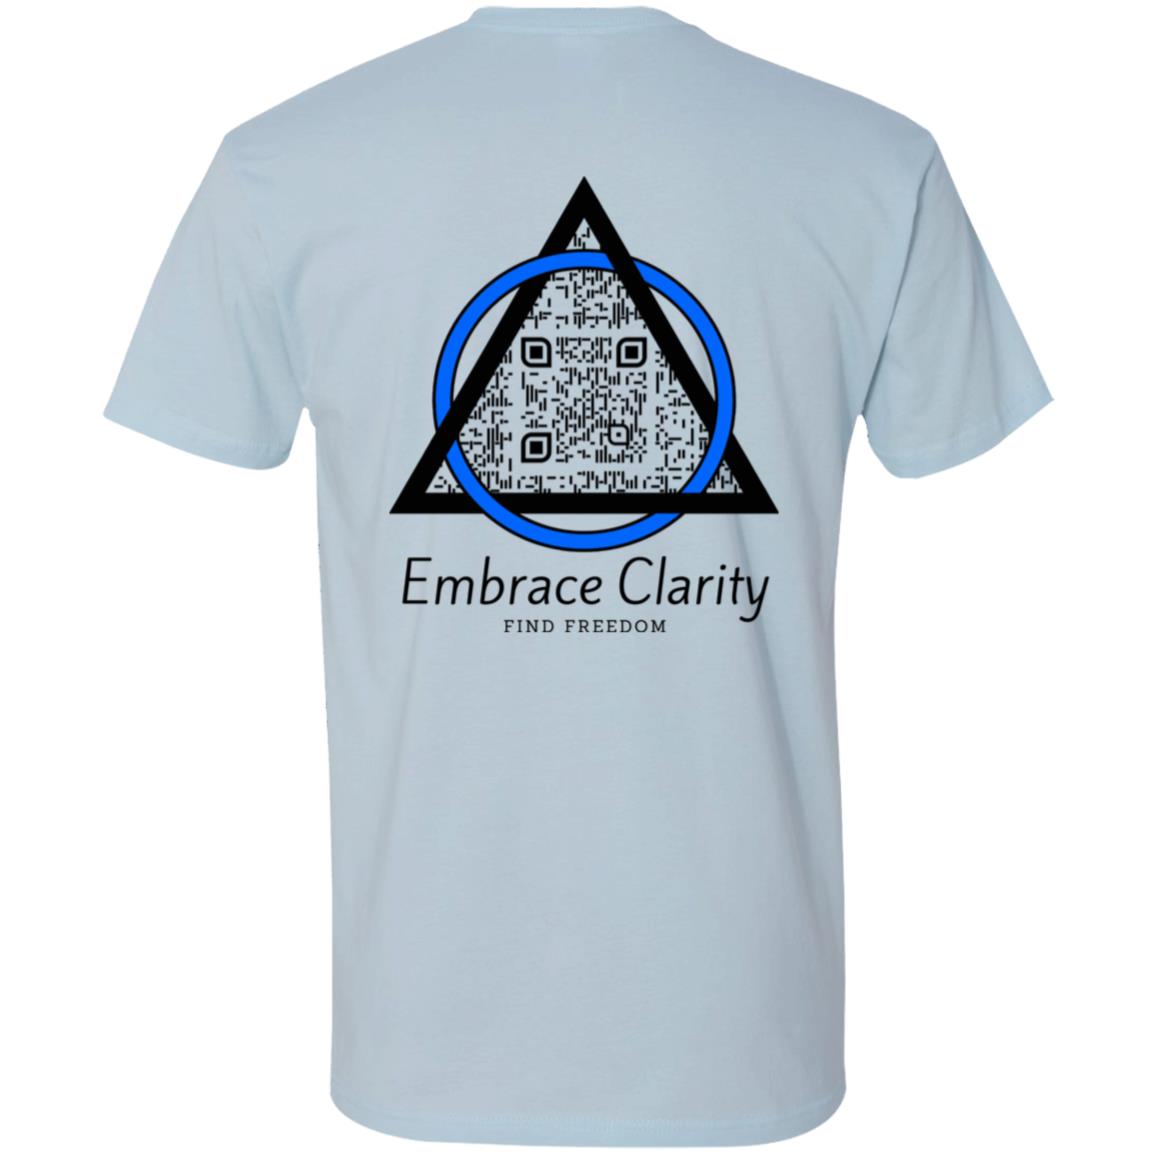 Embrace Clarity Tee - HopeLinks QrClothes